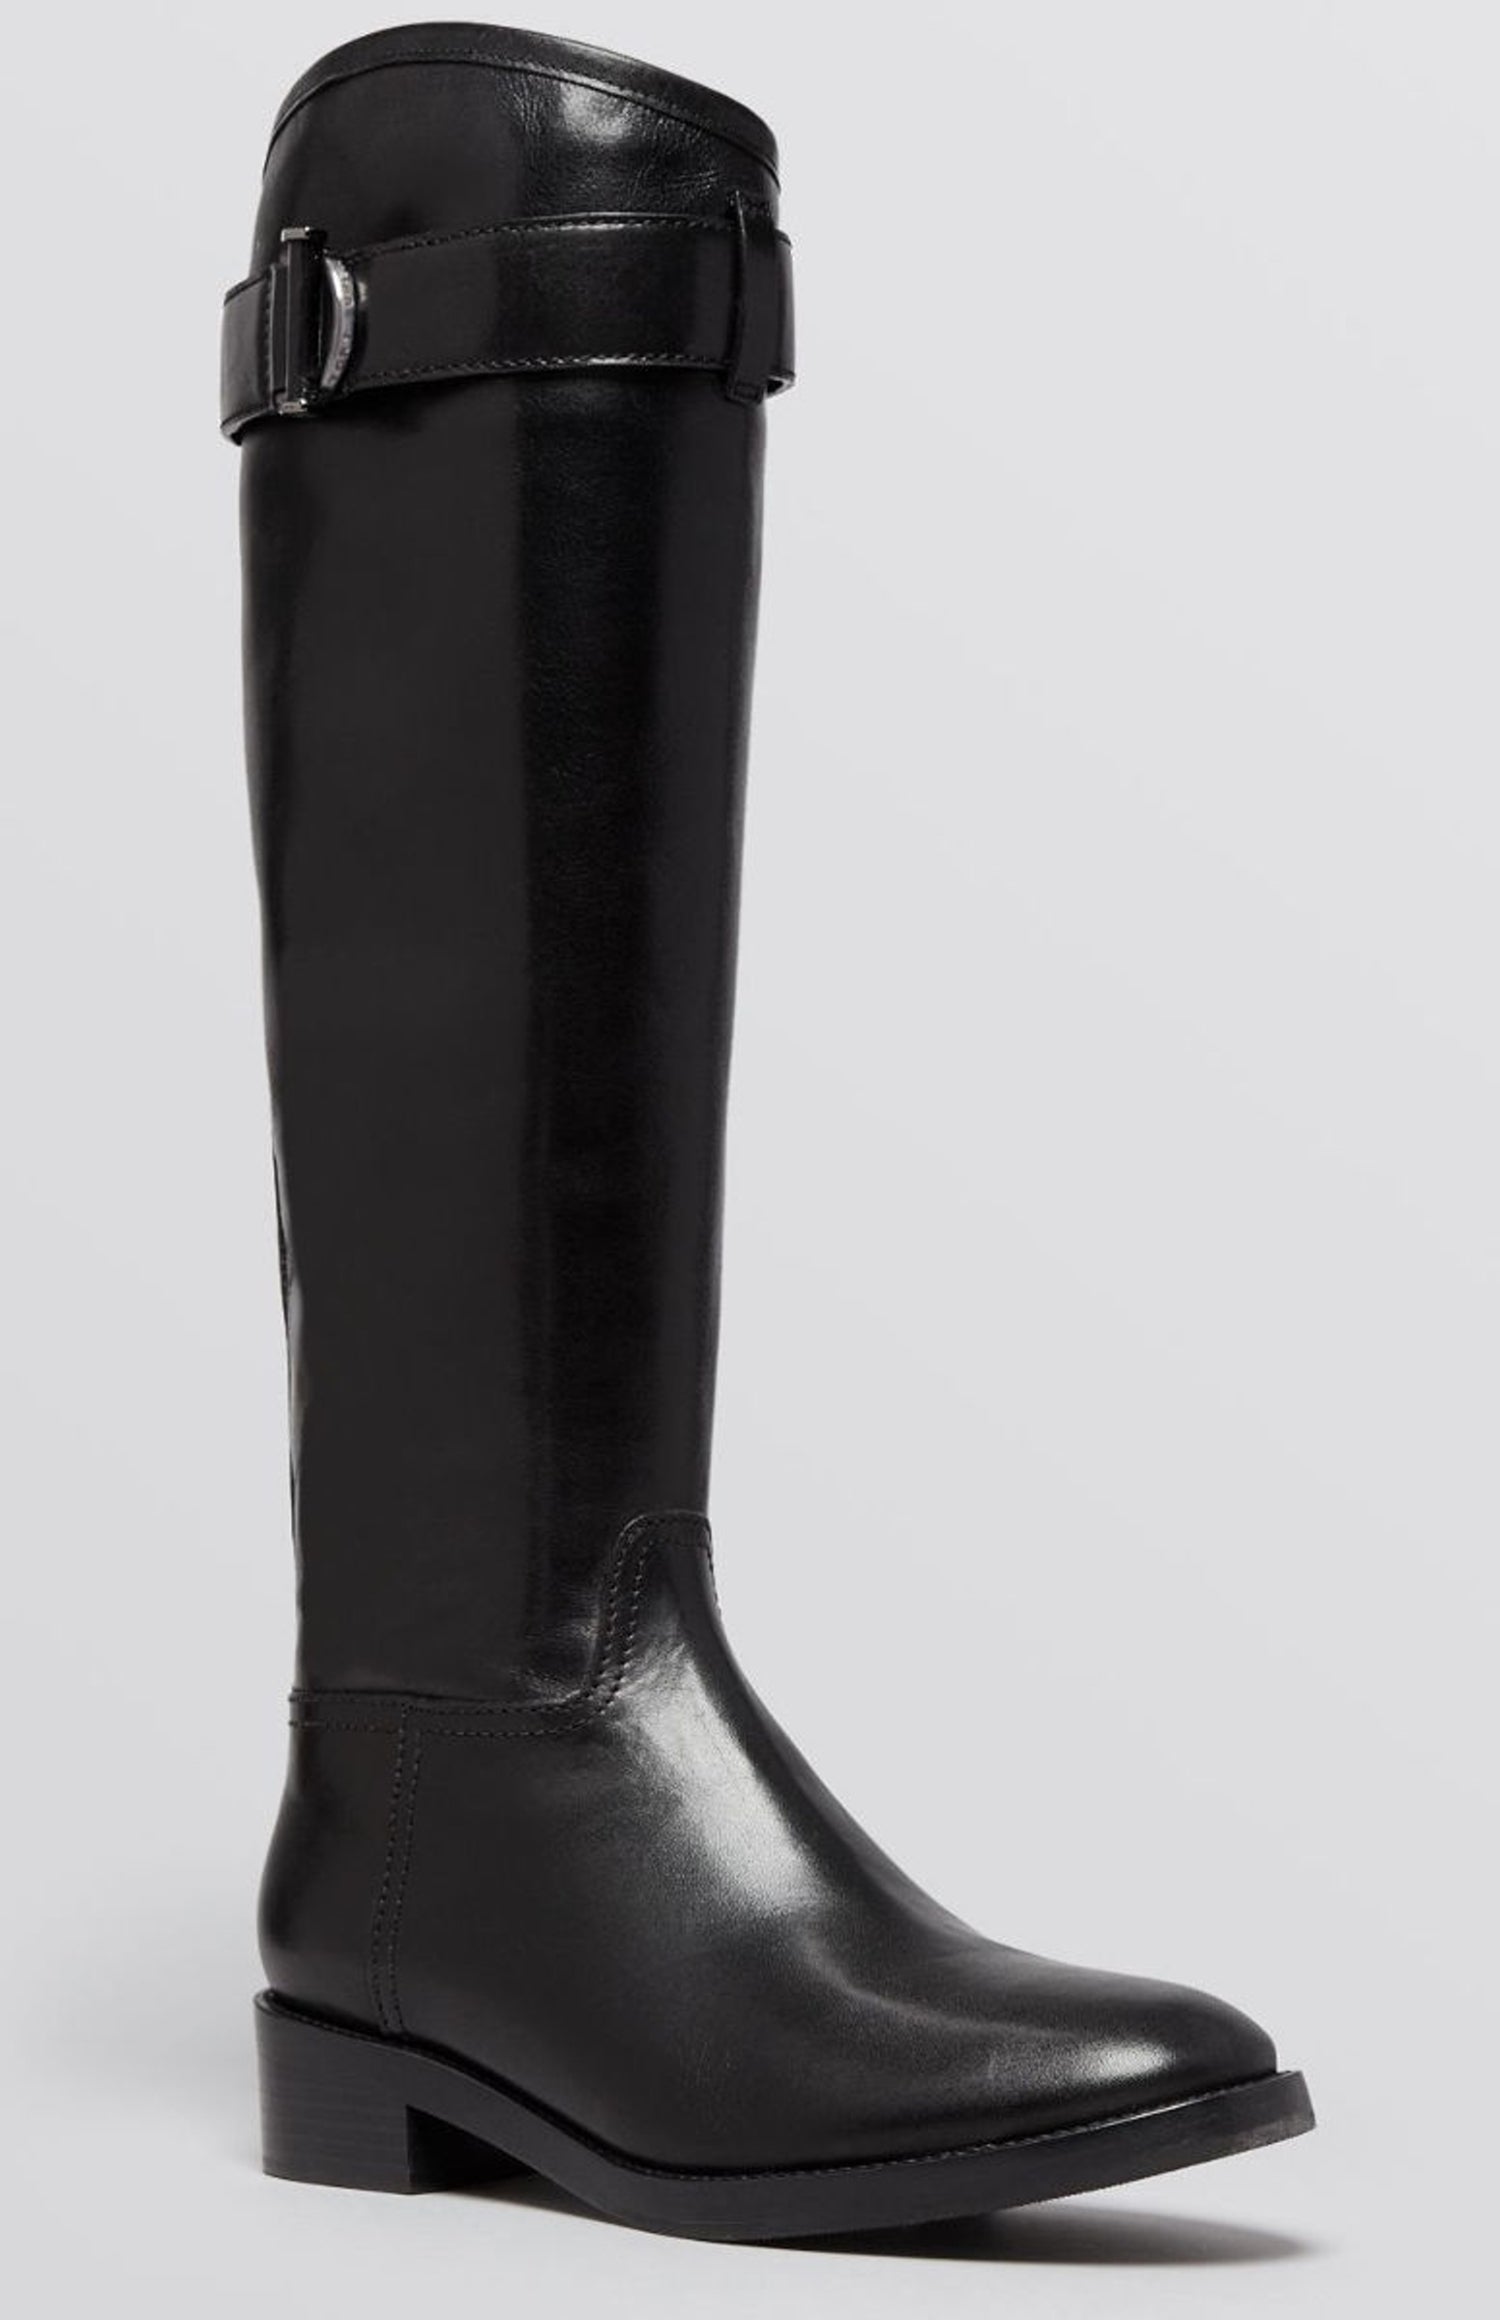 Tory Burch Grace Classic Tall Knee High Riding Boots SZ 6 Belted Top New $495